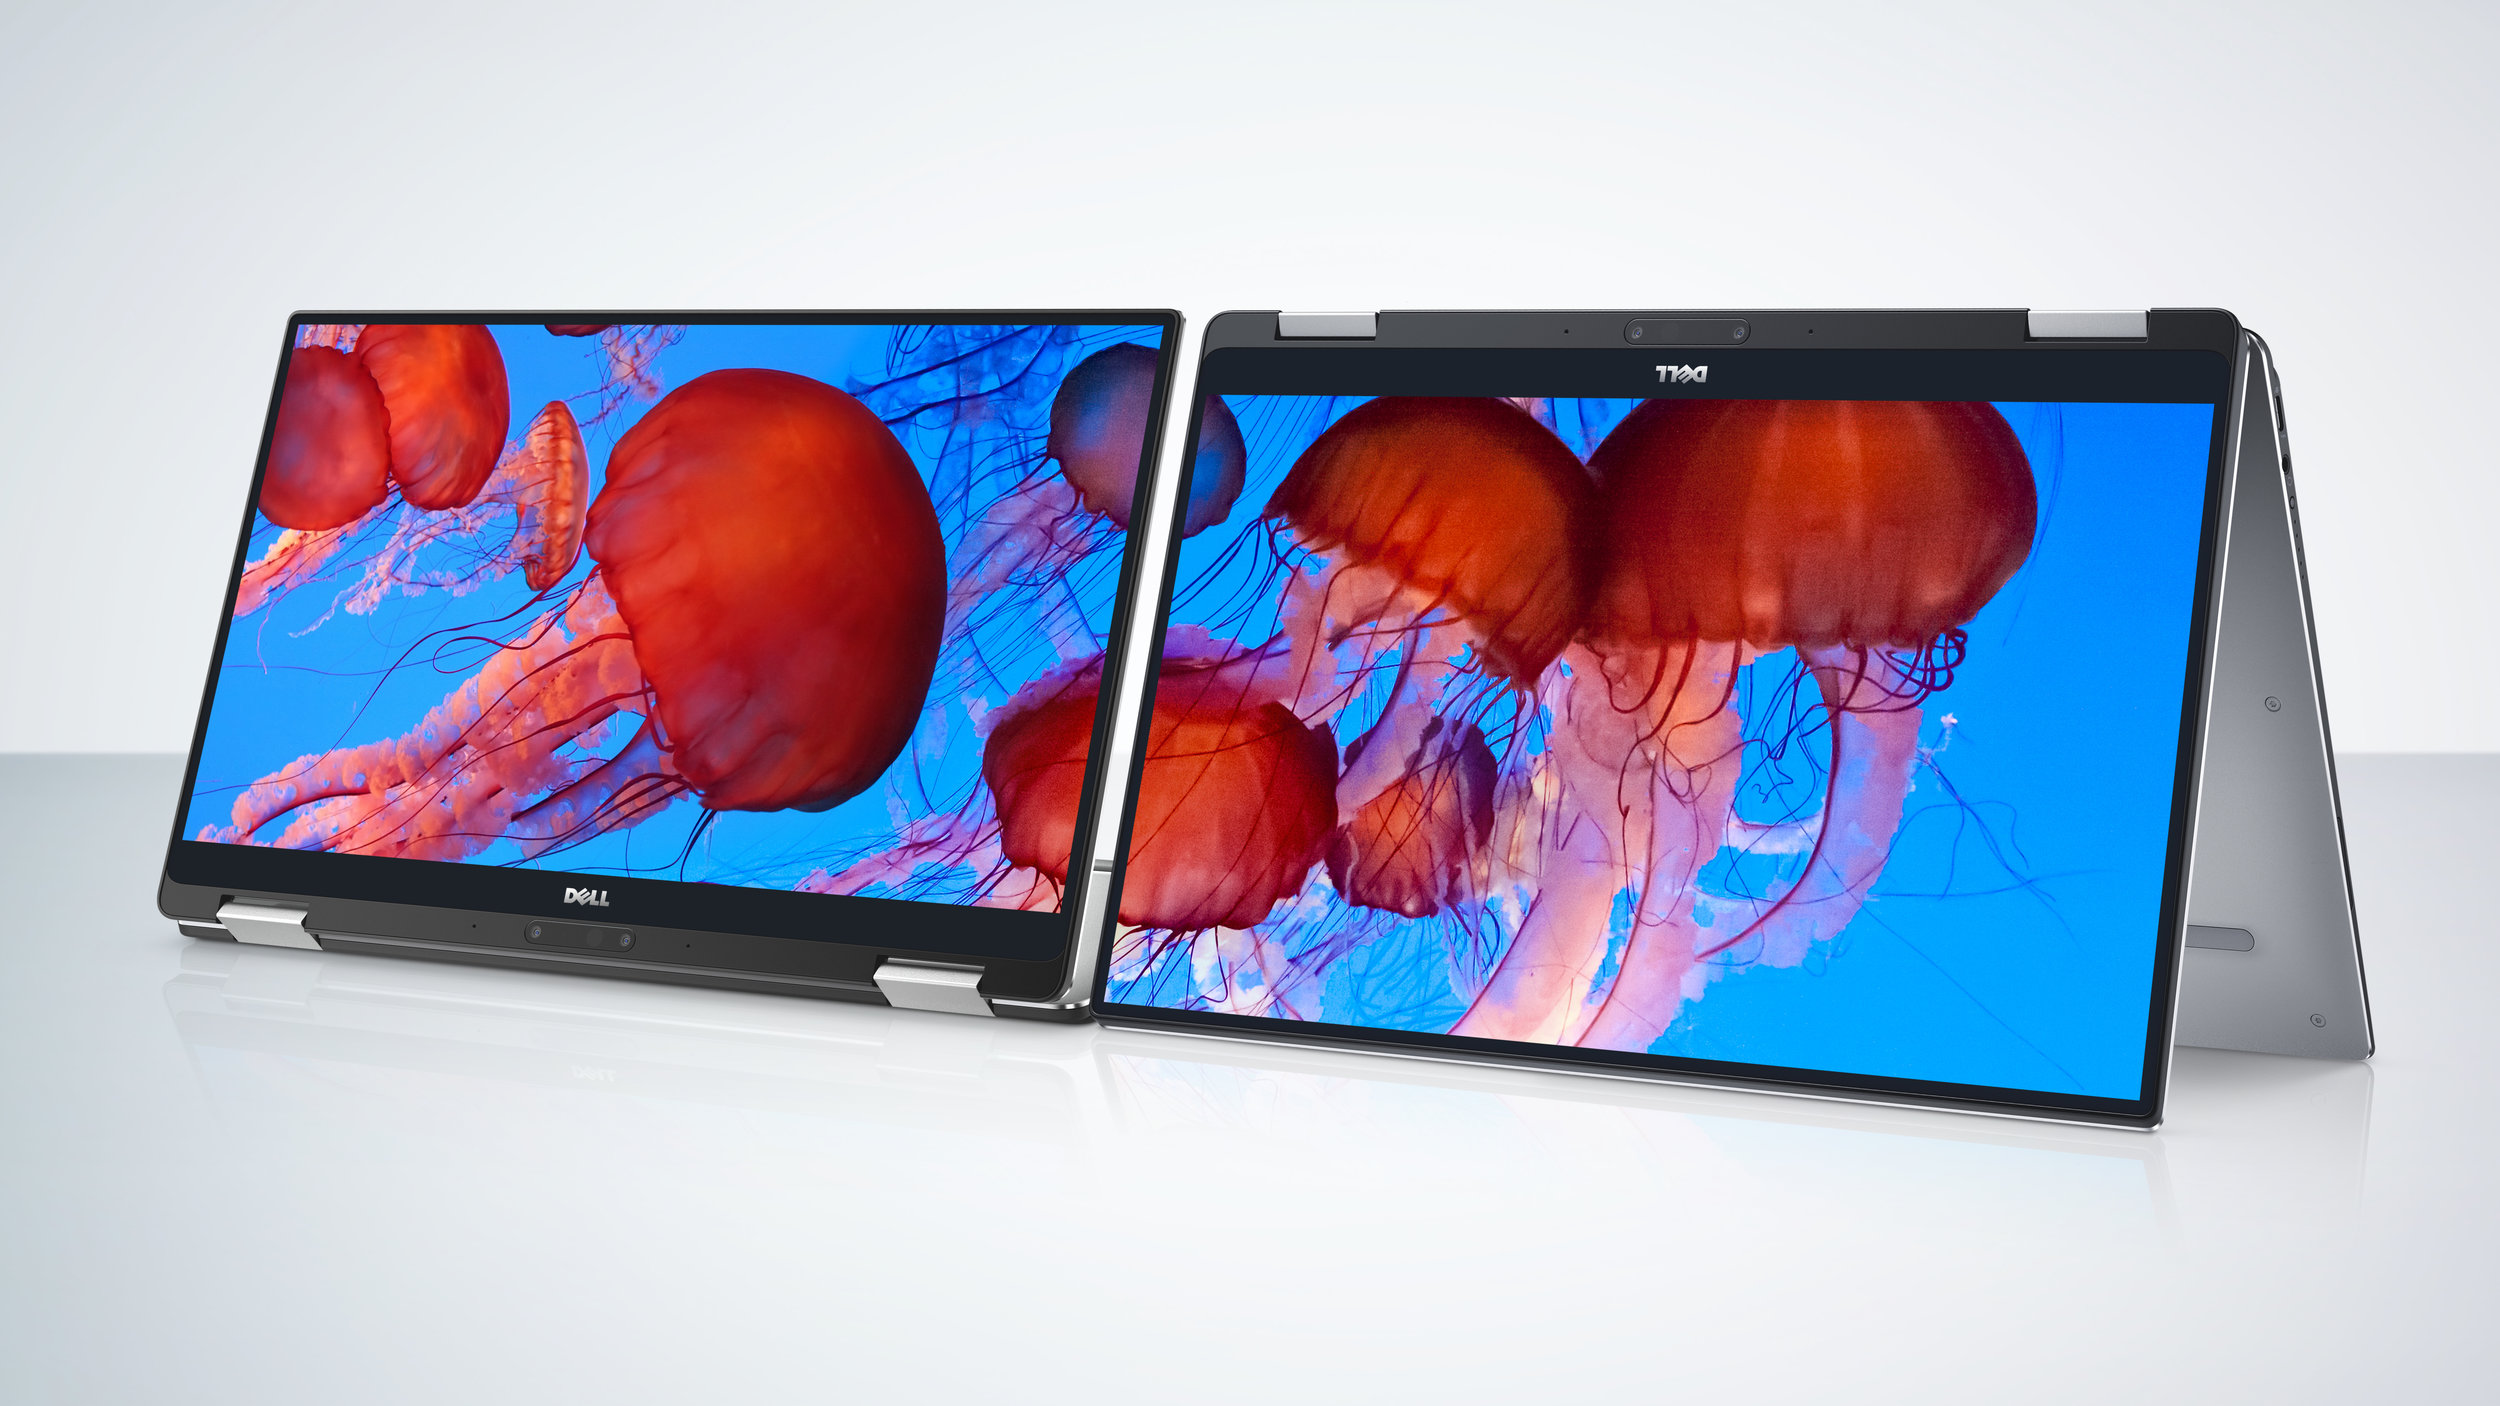 Dell XPS 13 2-in-1 Image_1.jpg